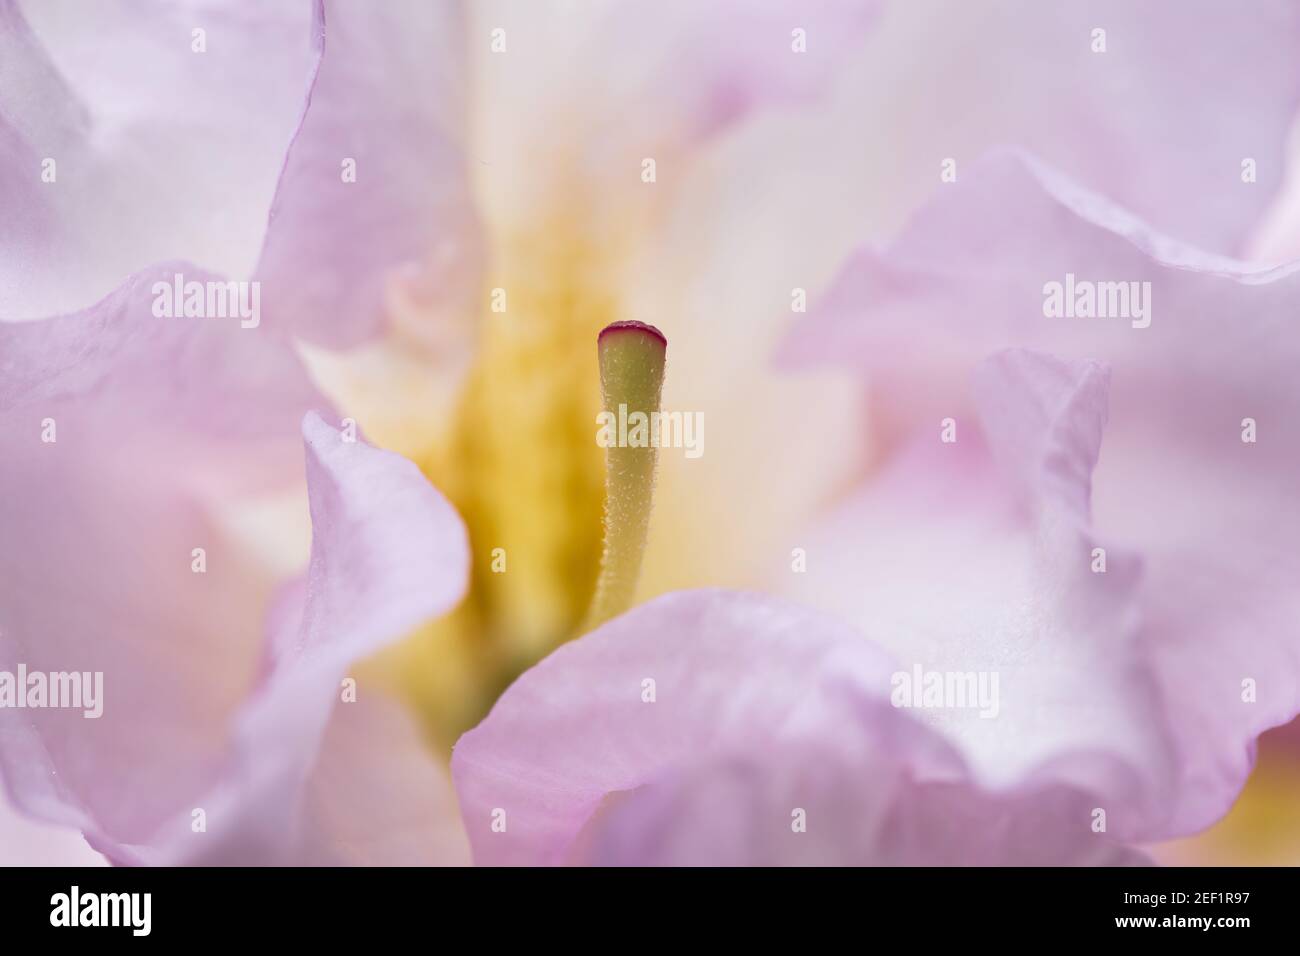 Macro image of a Rhododendron flower. Stock Photo